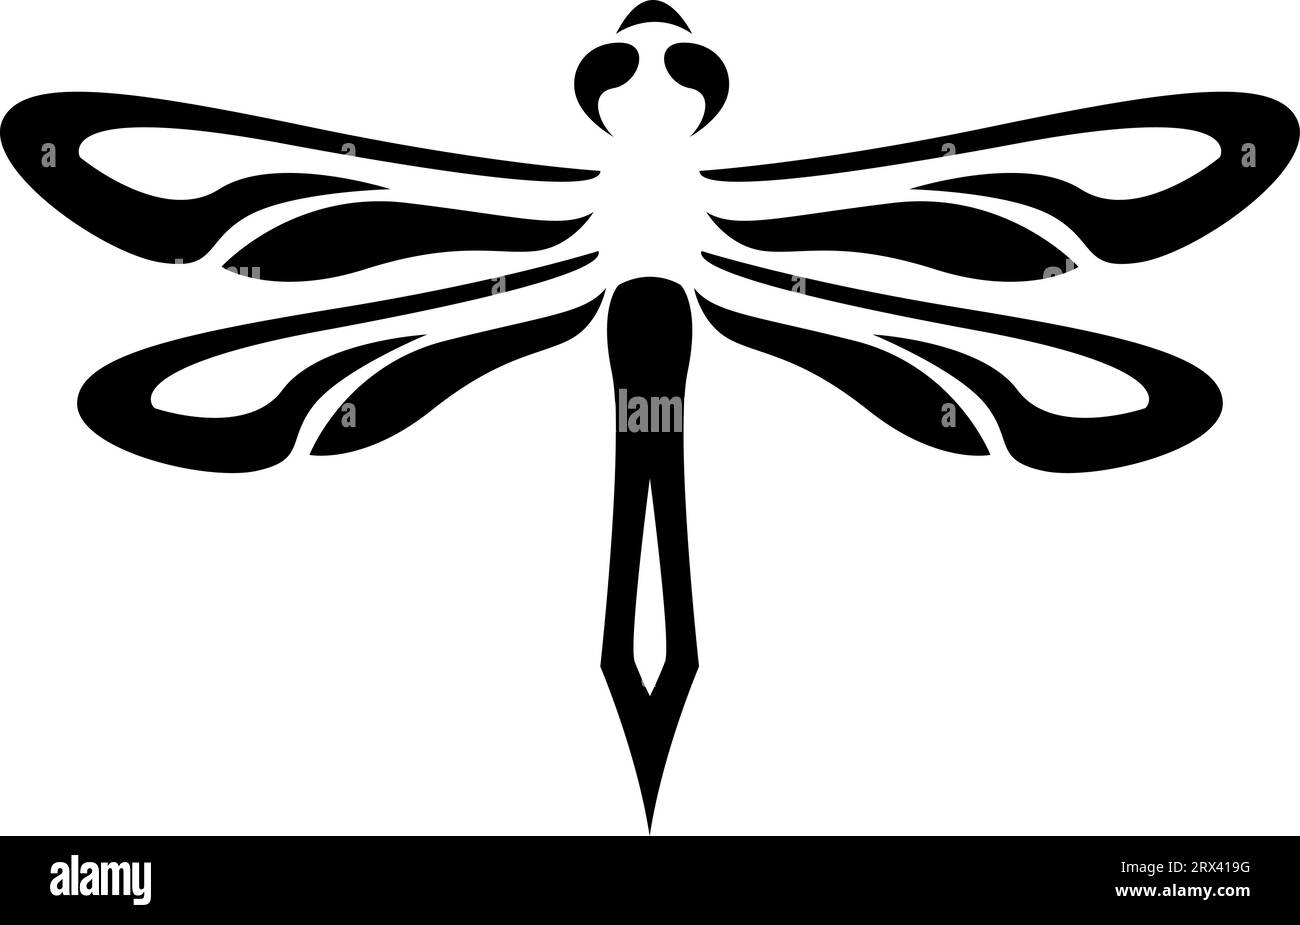 Buy Small Dragonfly Temporary Tattoo Online in India - Etsy